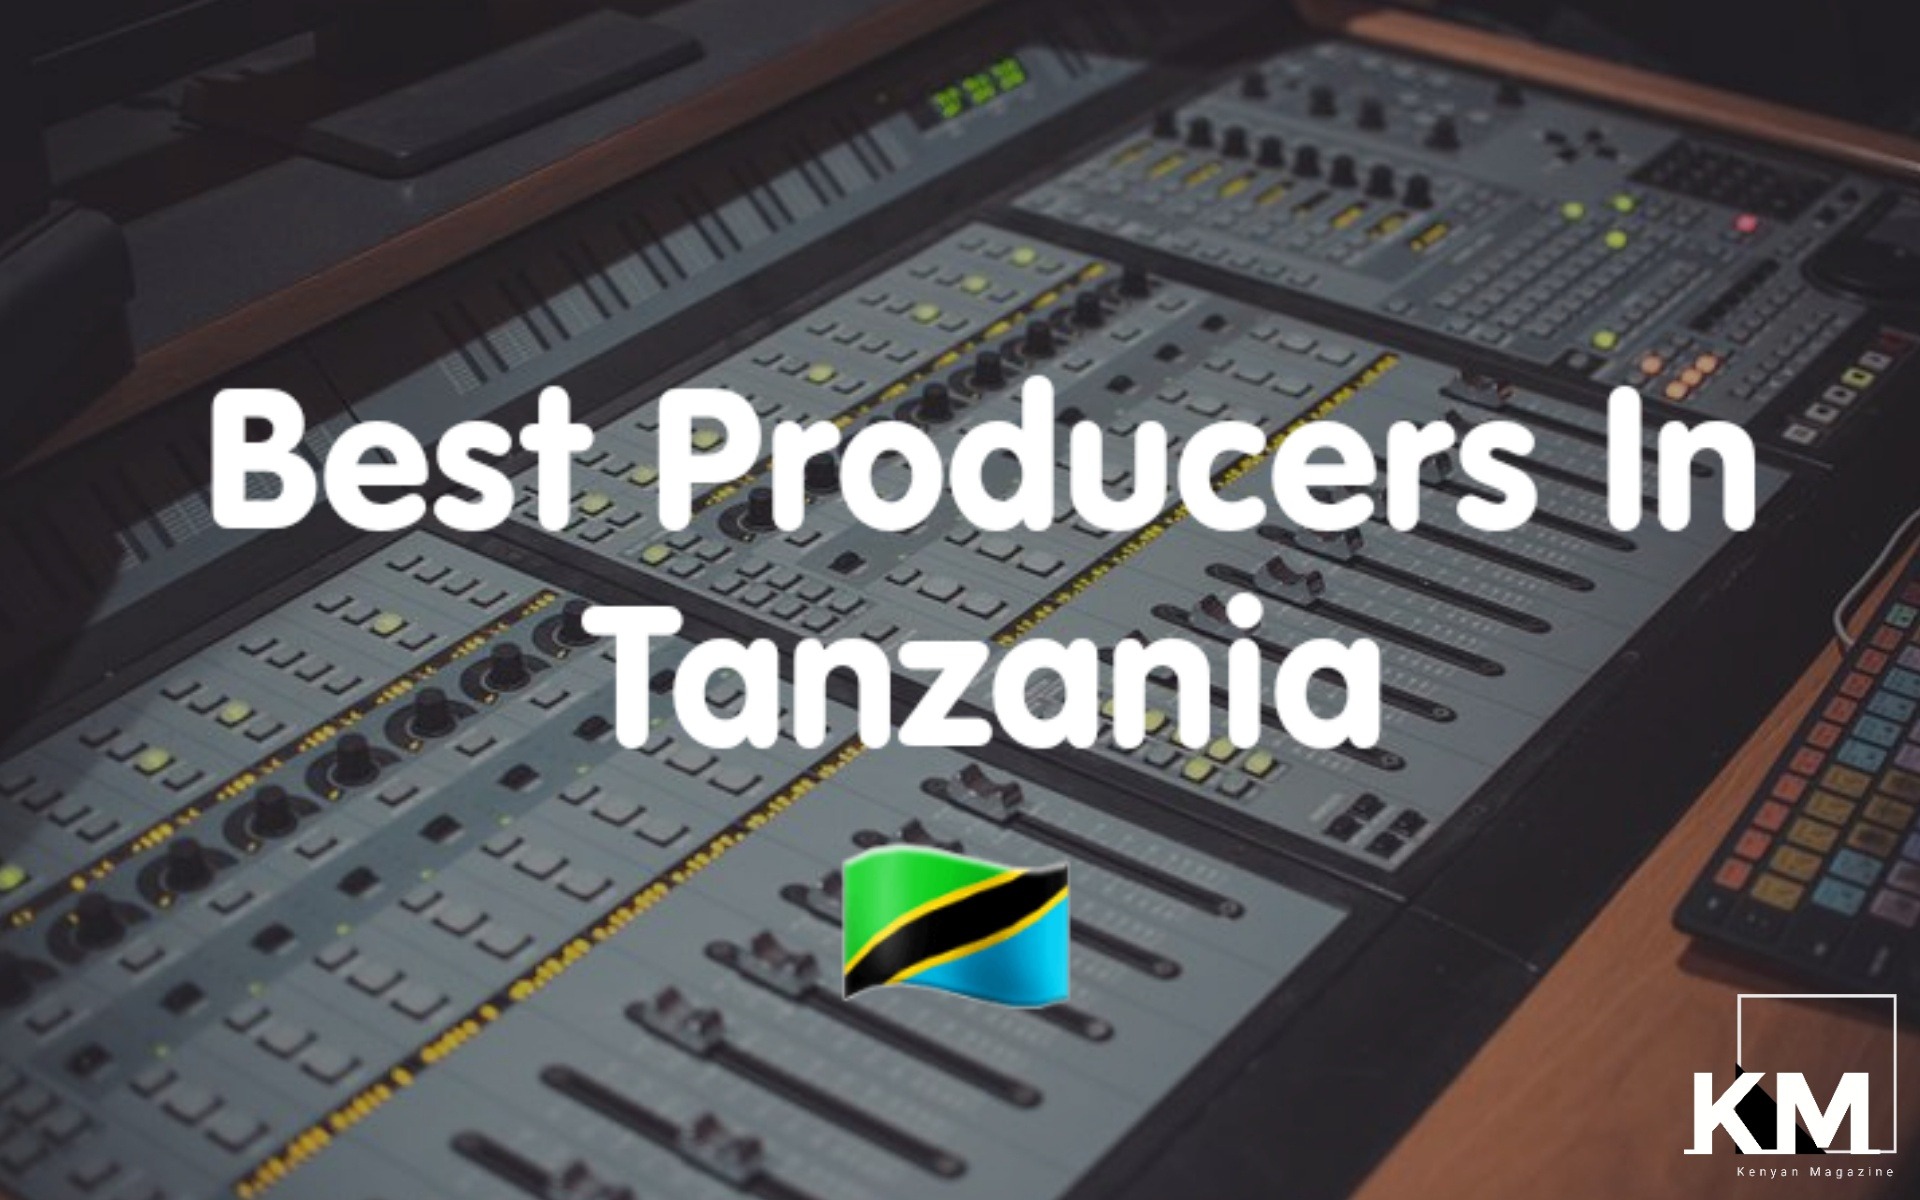 Best Producers In Tanzania